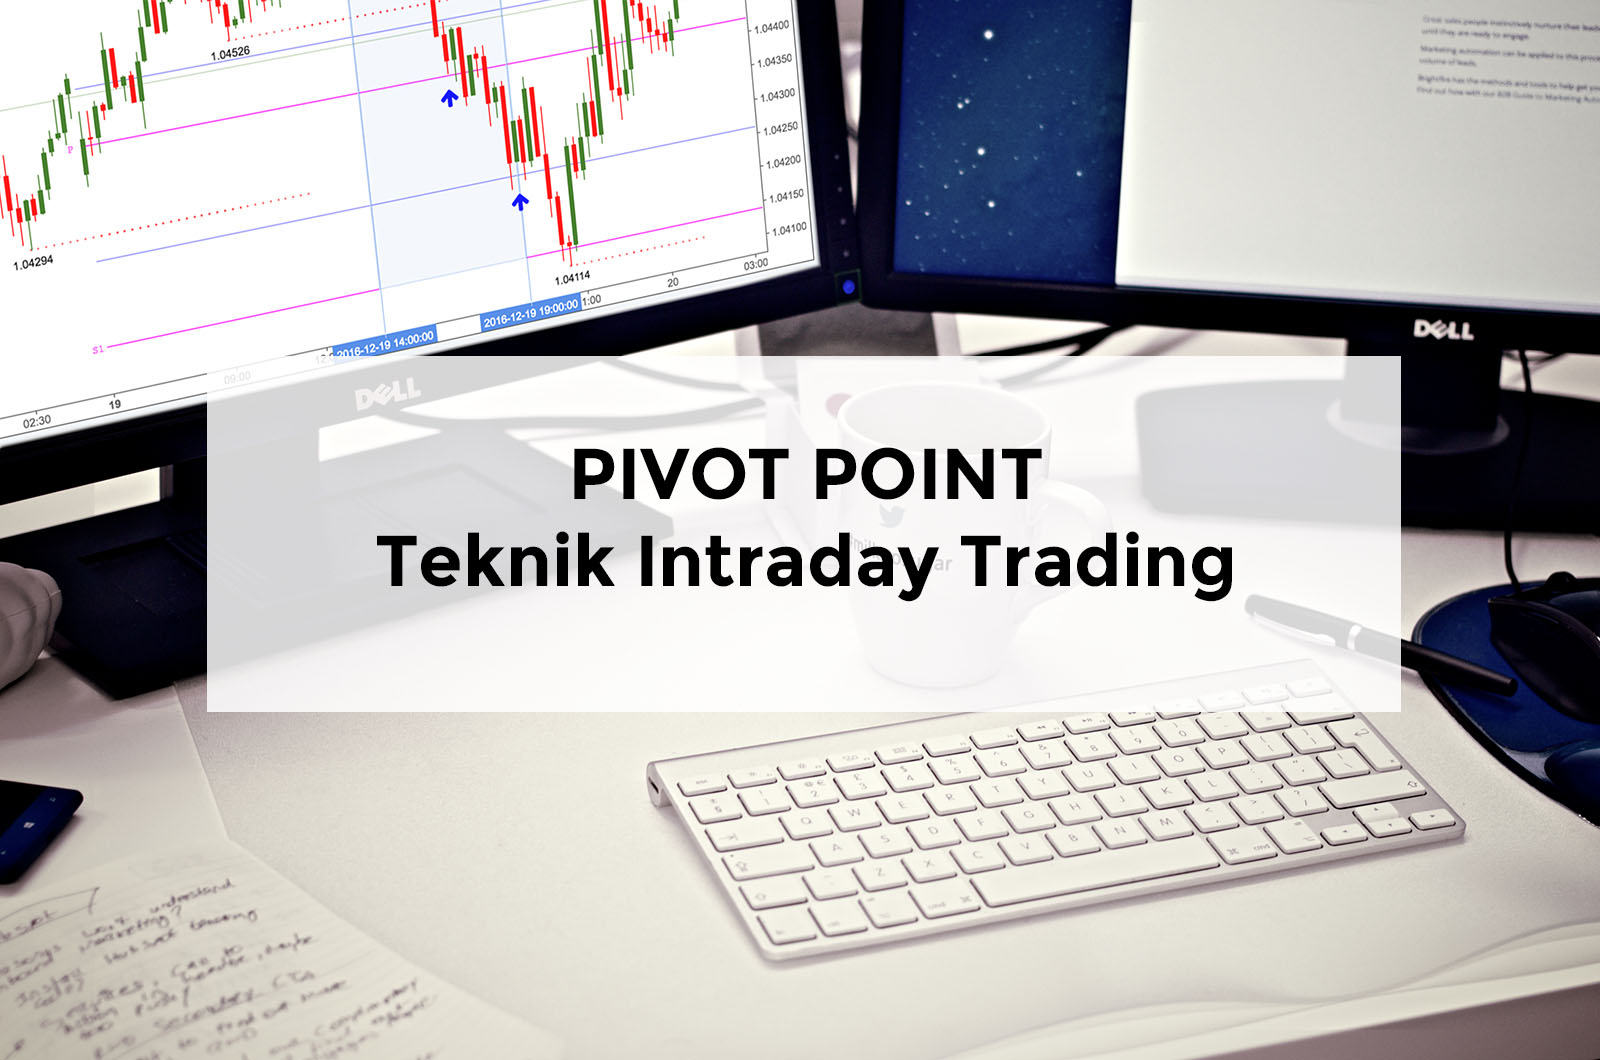 teknik intraday trading pivot point cover